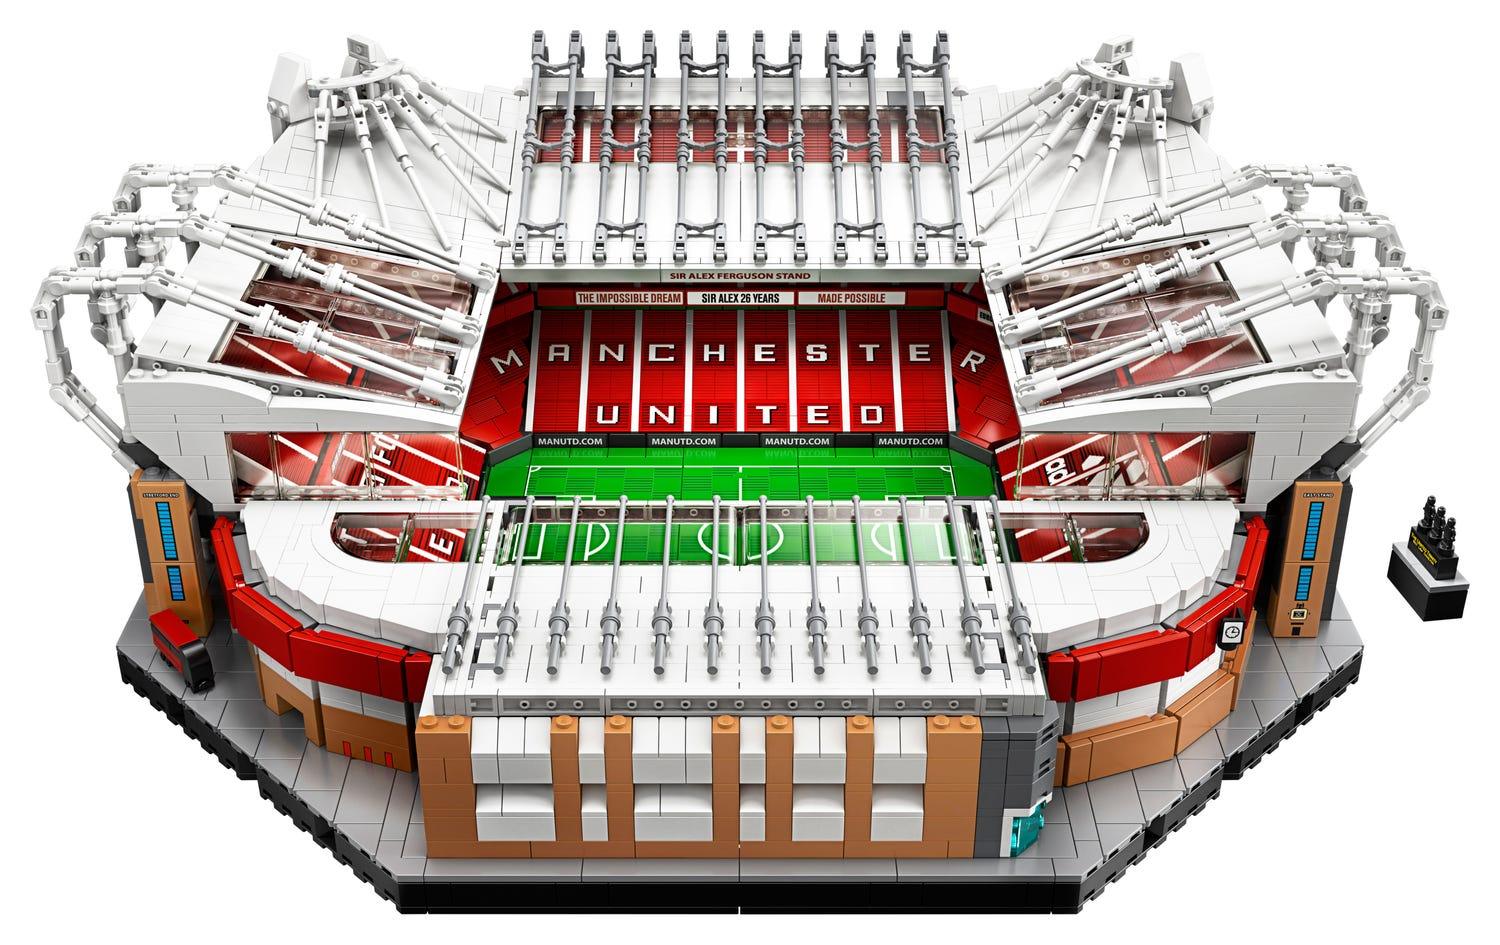 LEGO Manchester United Voetbal stadion 10272 Creator Expert | 2TTOYS ✓ Official shop<br>